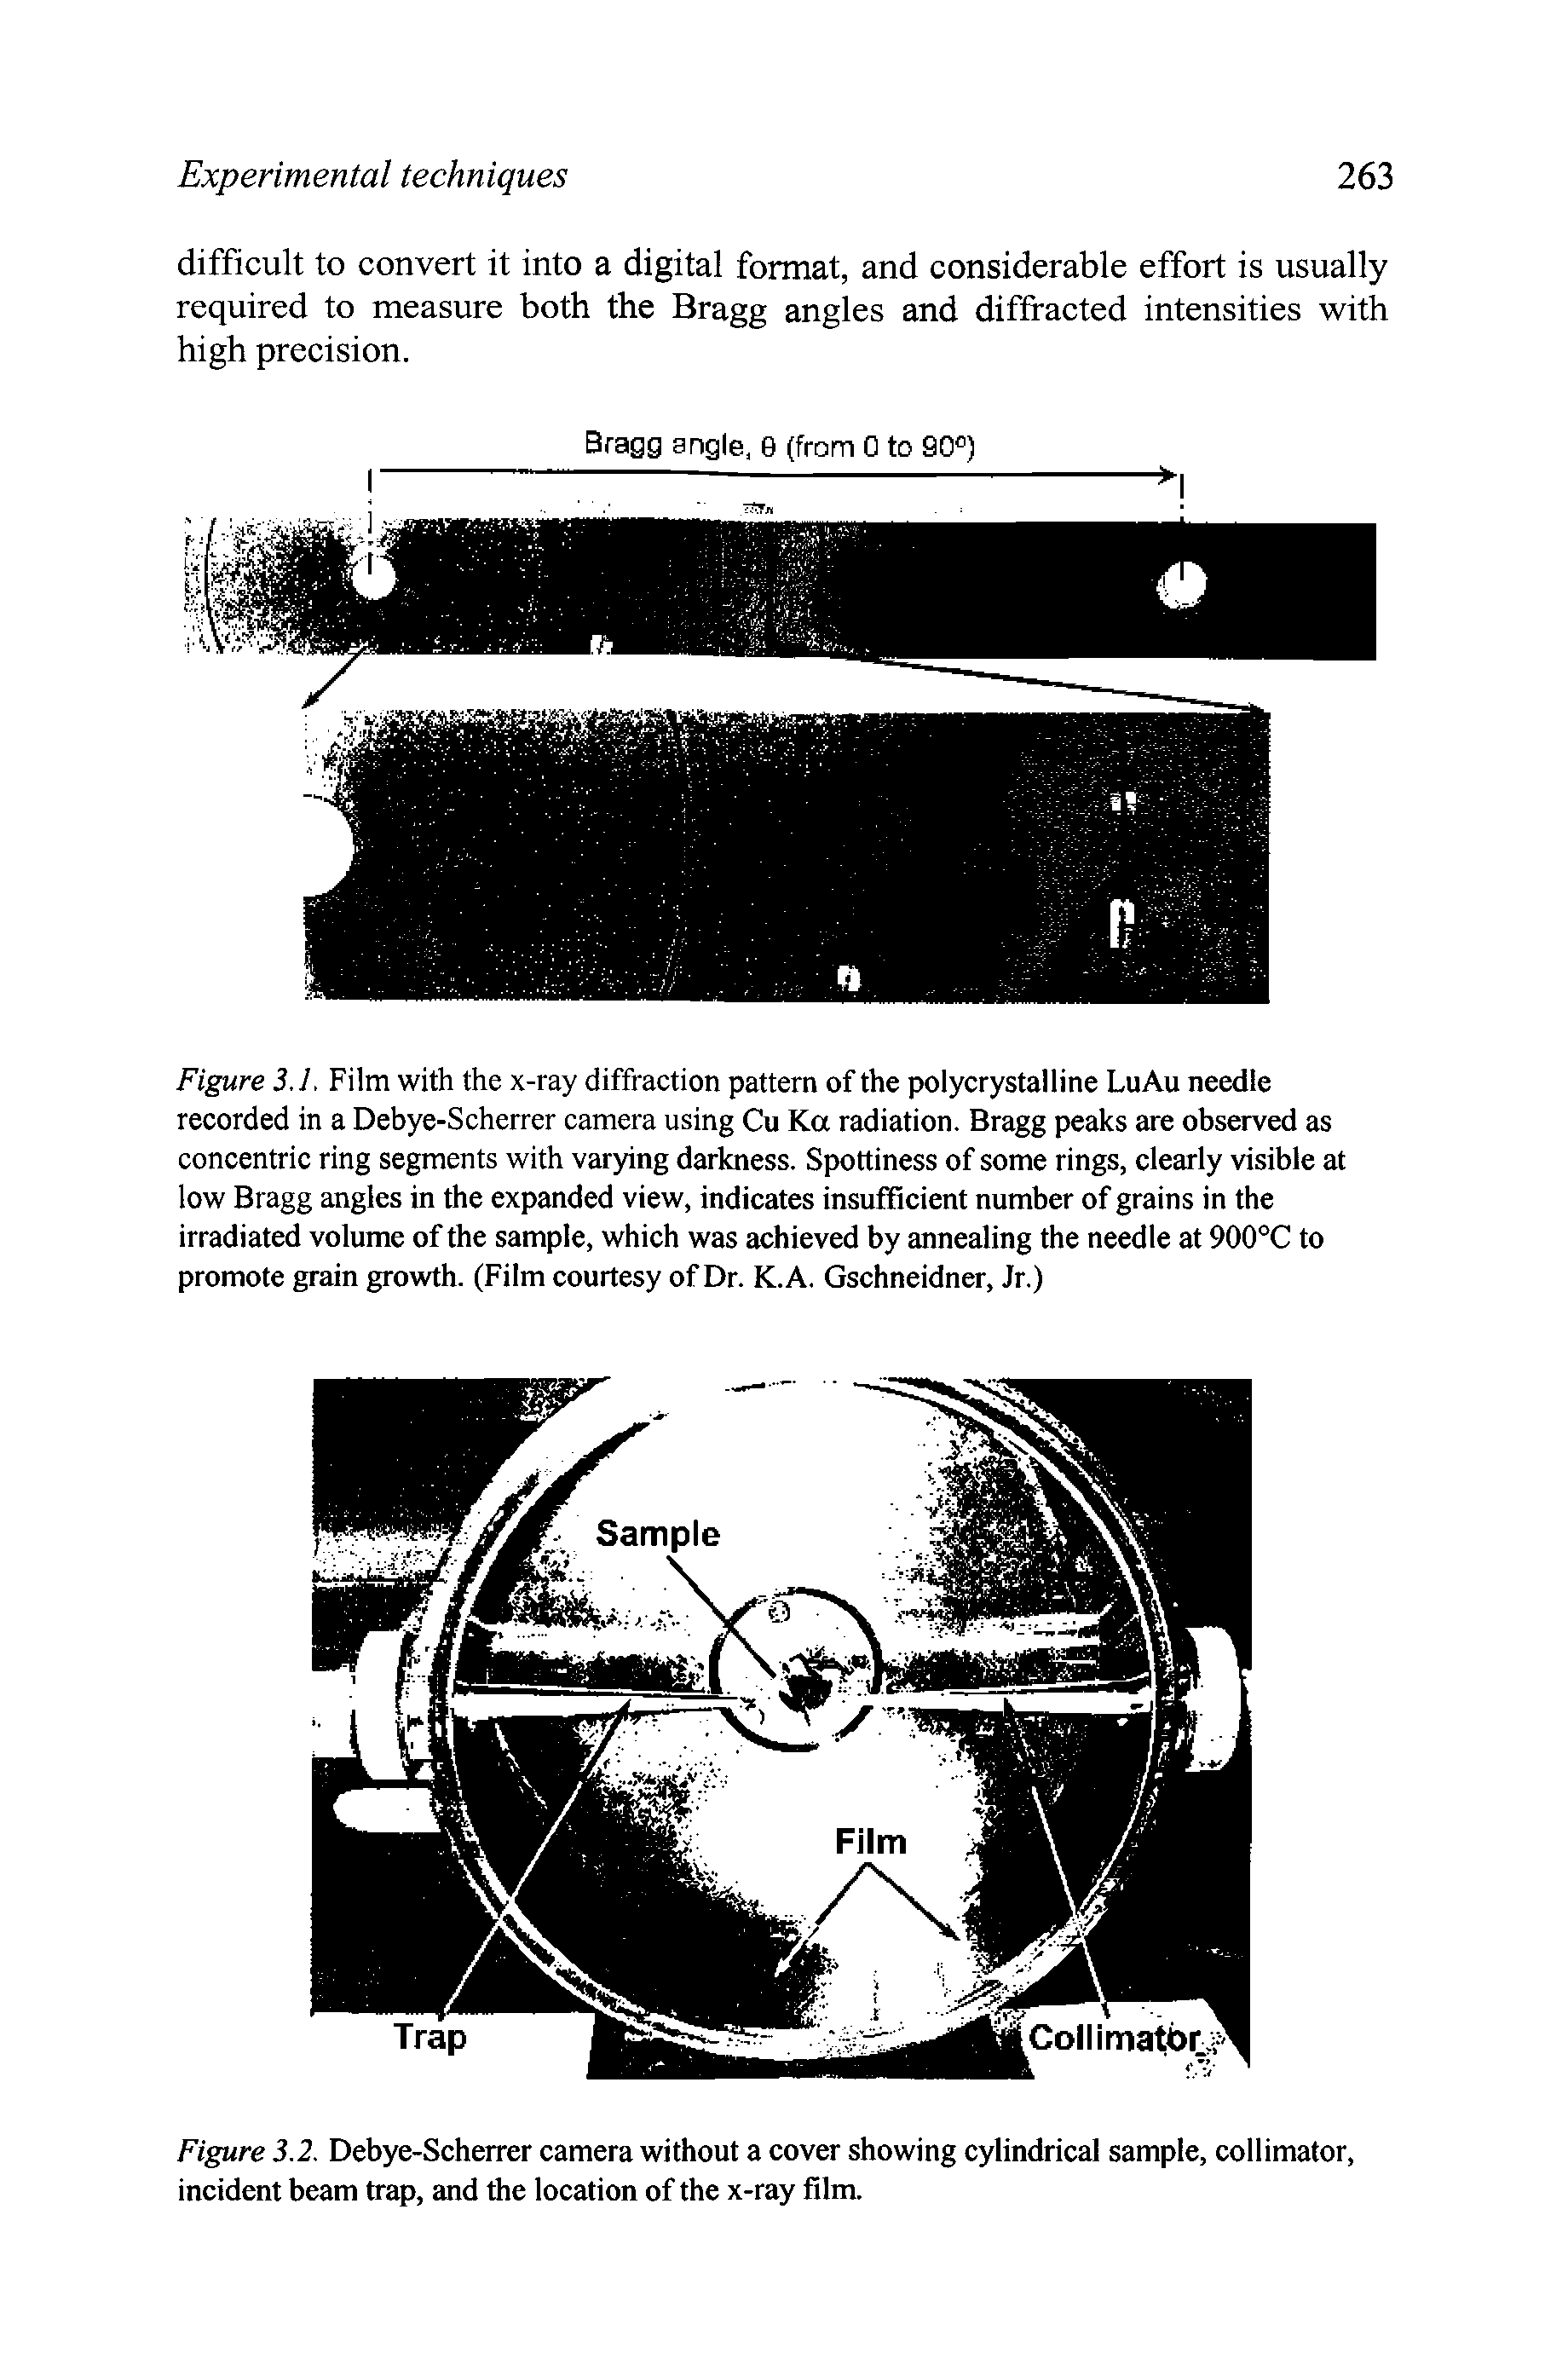 Figure 3.2. Debye-Scherrer camera without a cover showing cylindrical sample, collimator, incident beam trap, and the location of the x-ray film.